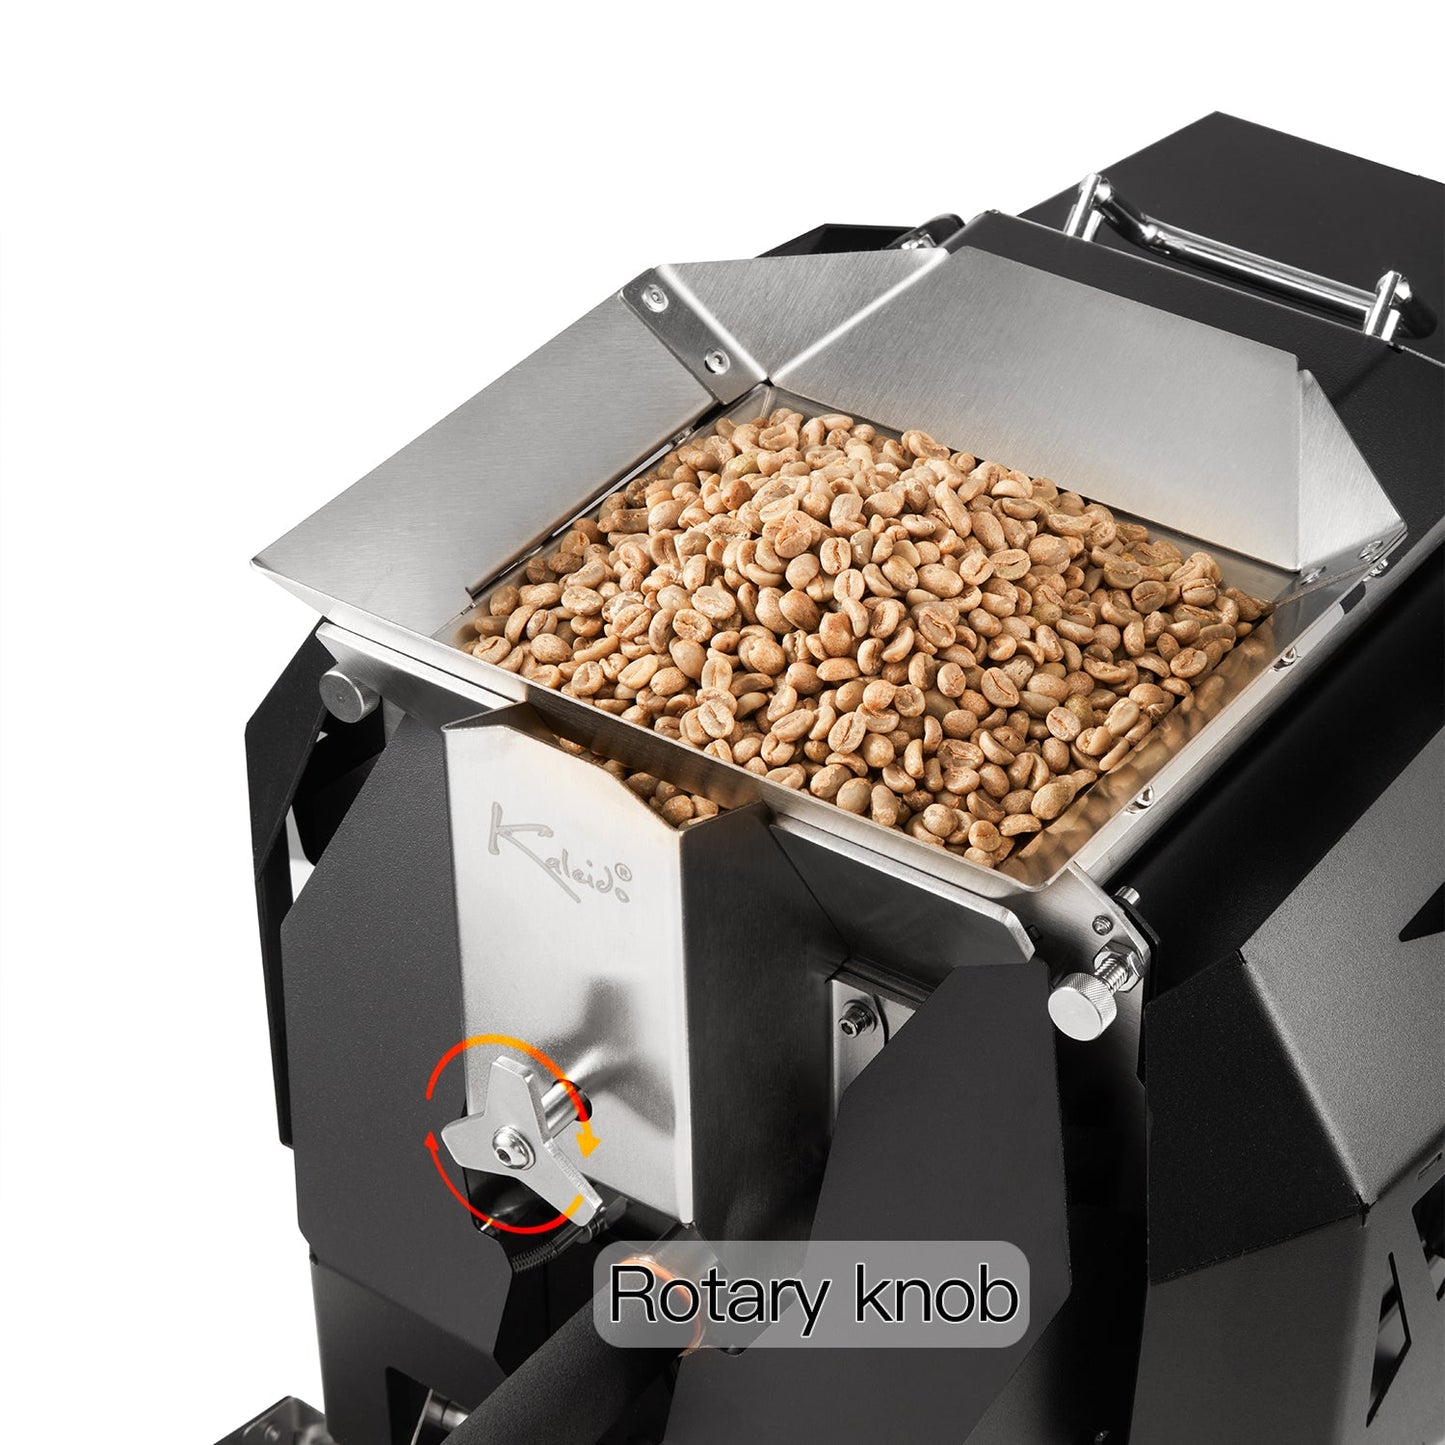 Kaleido Sniper M10S PRO  Electric Heating Coffee Roaster  (Only by Artisan operation )- Dual Temperature Probe,Sealed Negative Pressure Bean Storage, Enhanced Steel Mesh Bean Drum, Direct Fire Heating, and Hot Air Circulation System(300-1200g)